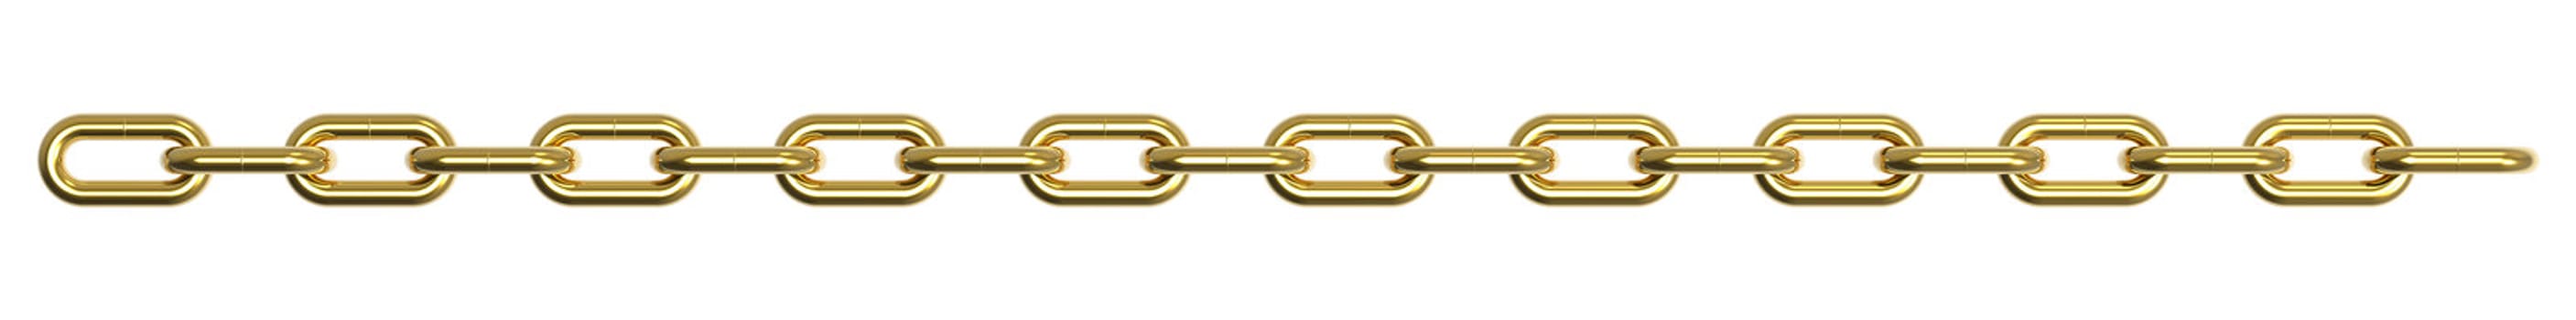 3d render of a golden chain isolated on a white background